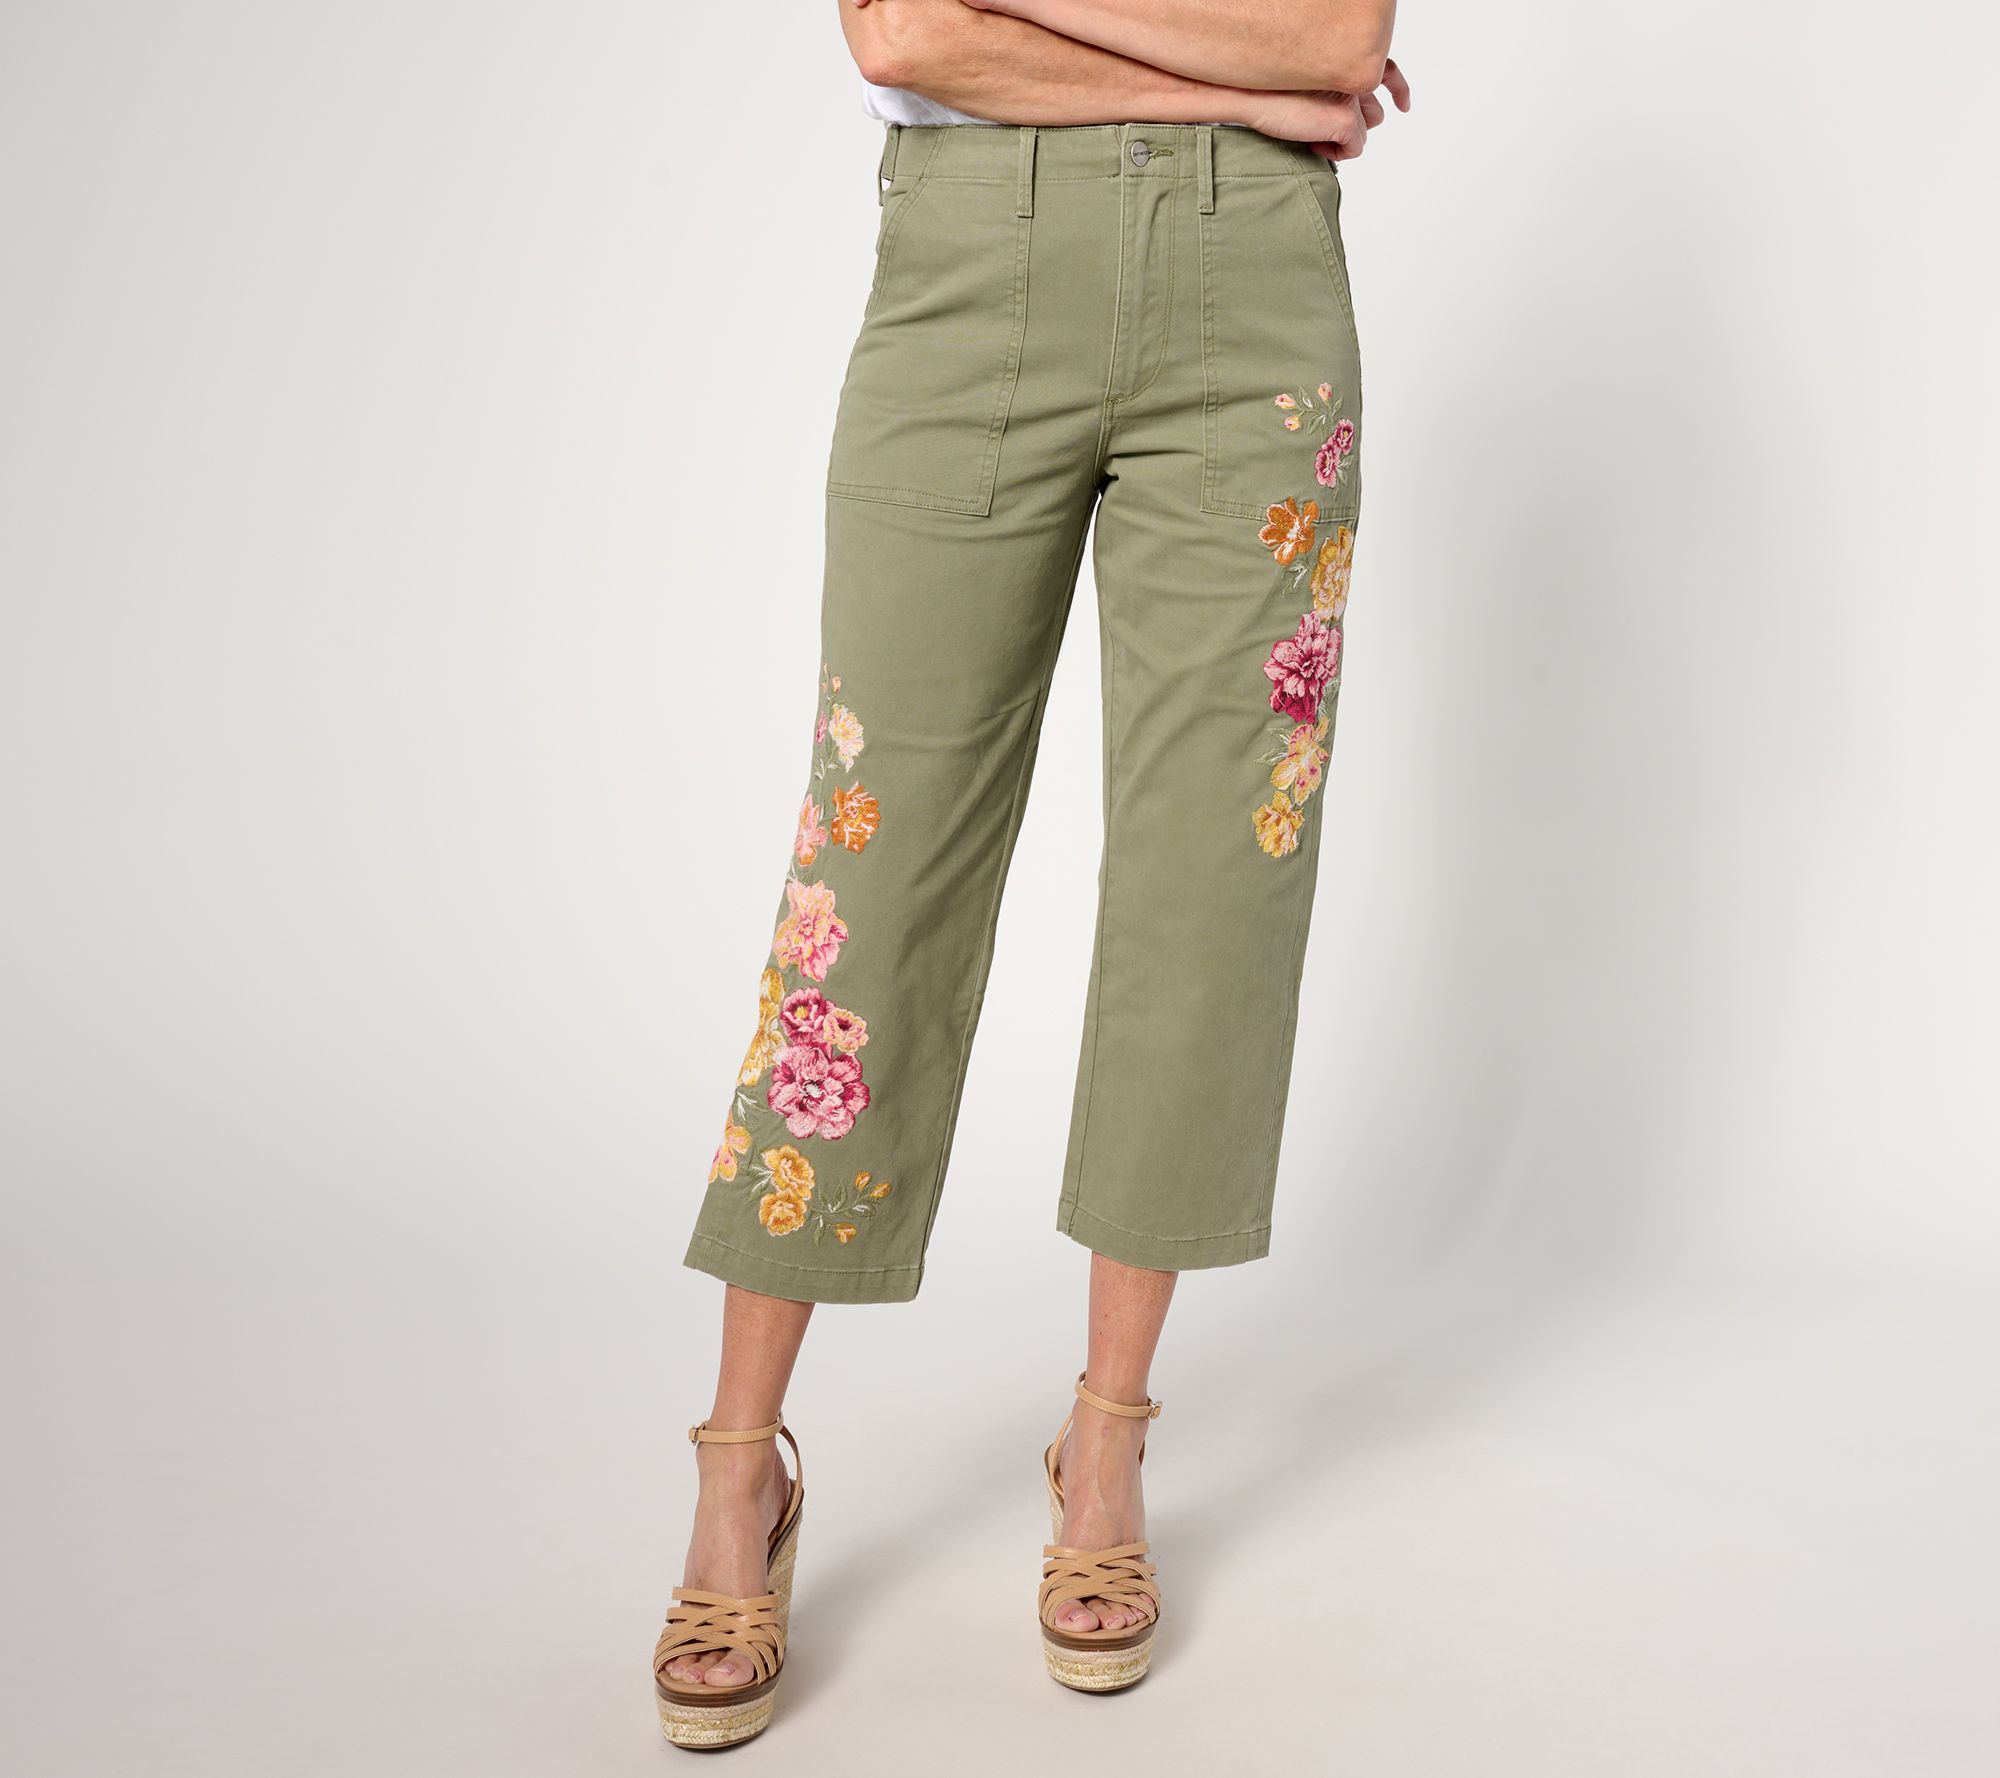 Natural Reflections Capris Pants Women's Size 14 Green 6 Pockets Clam  Diggers